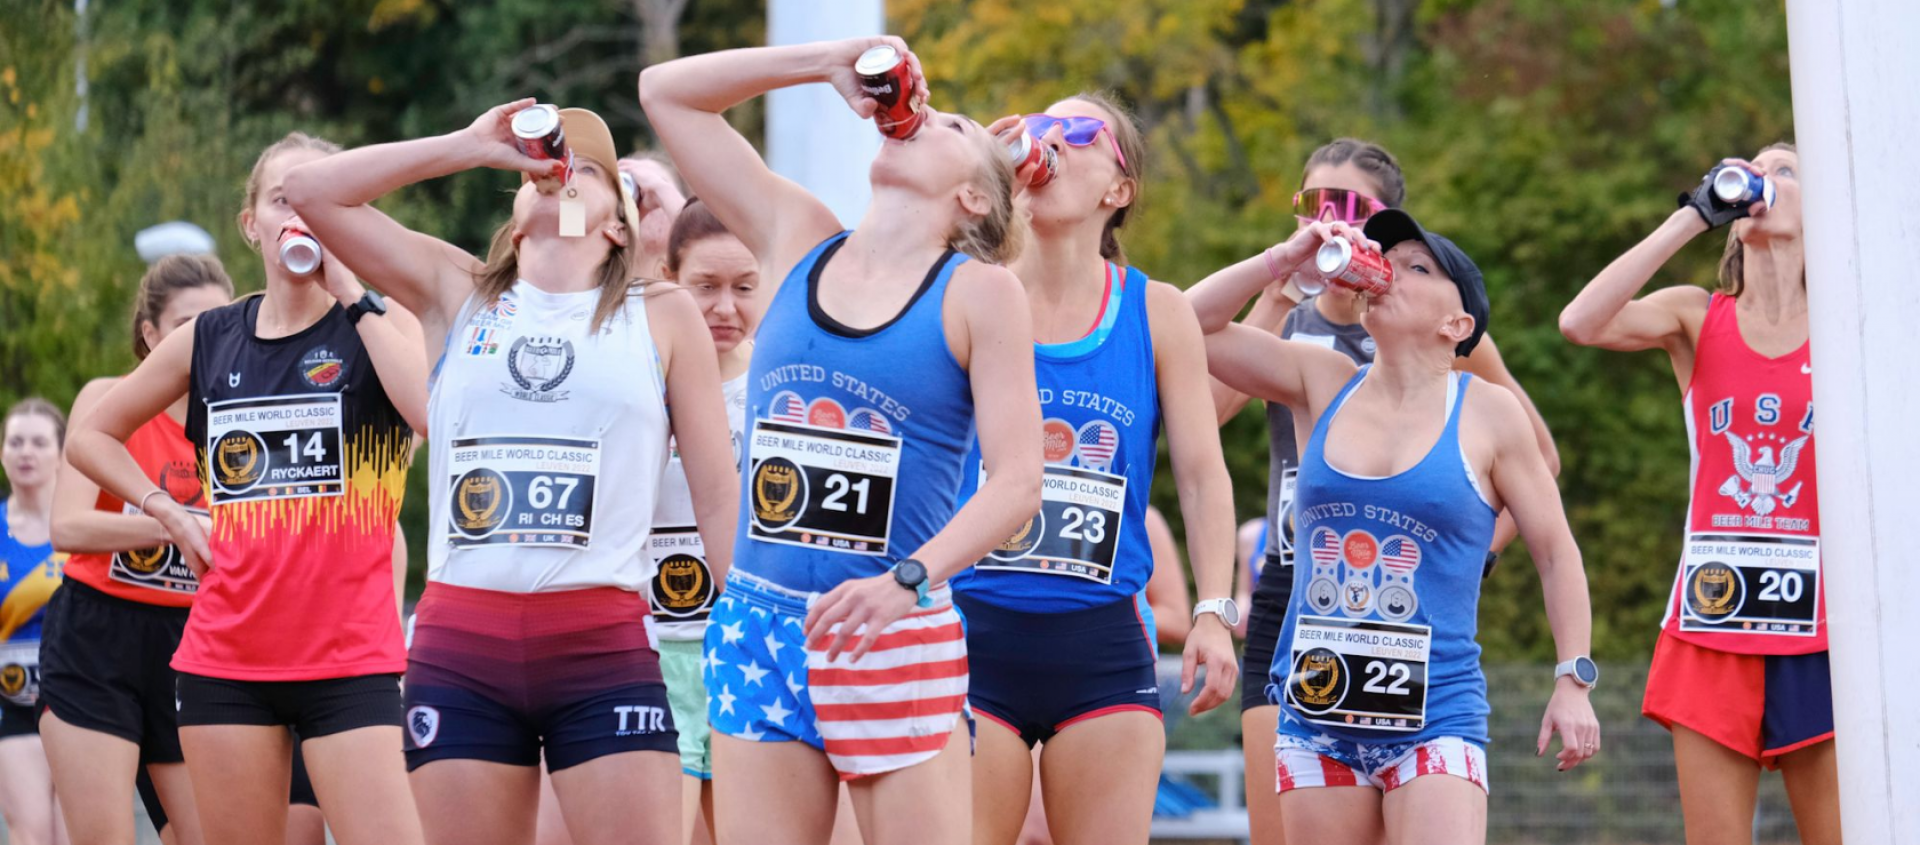 Photo for: Chicago Beer Mile Championships